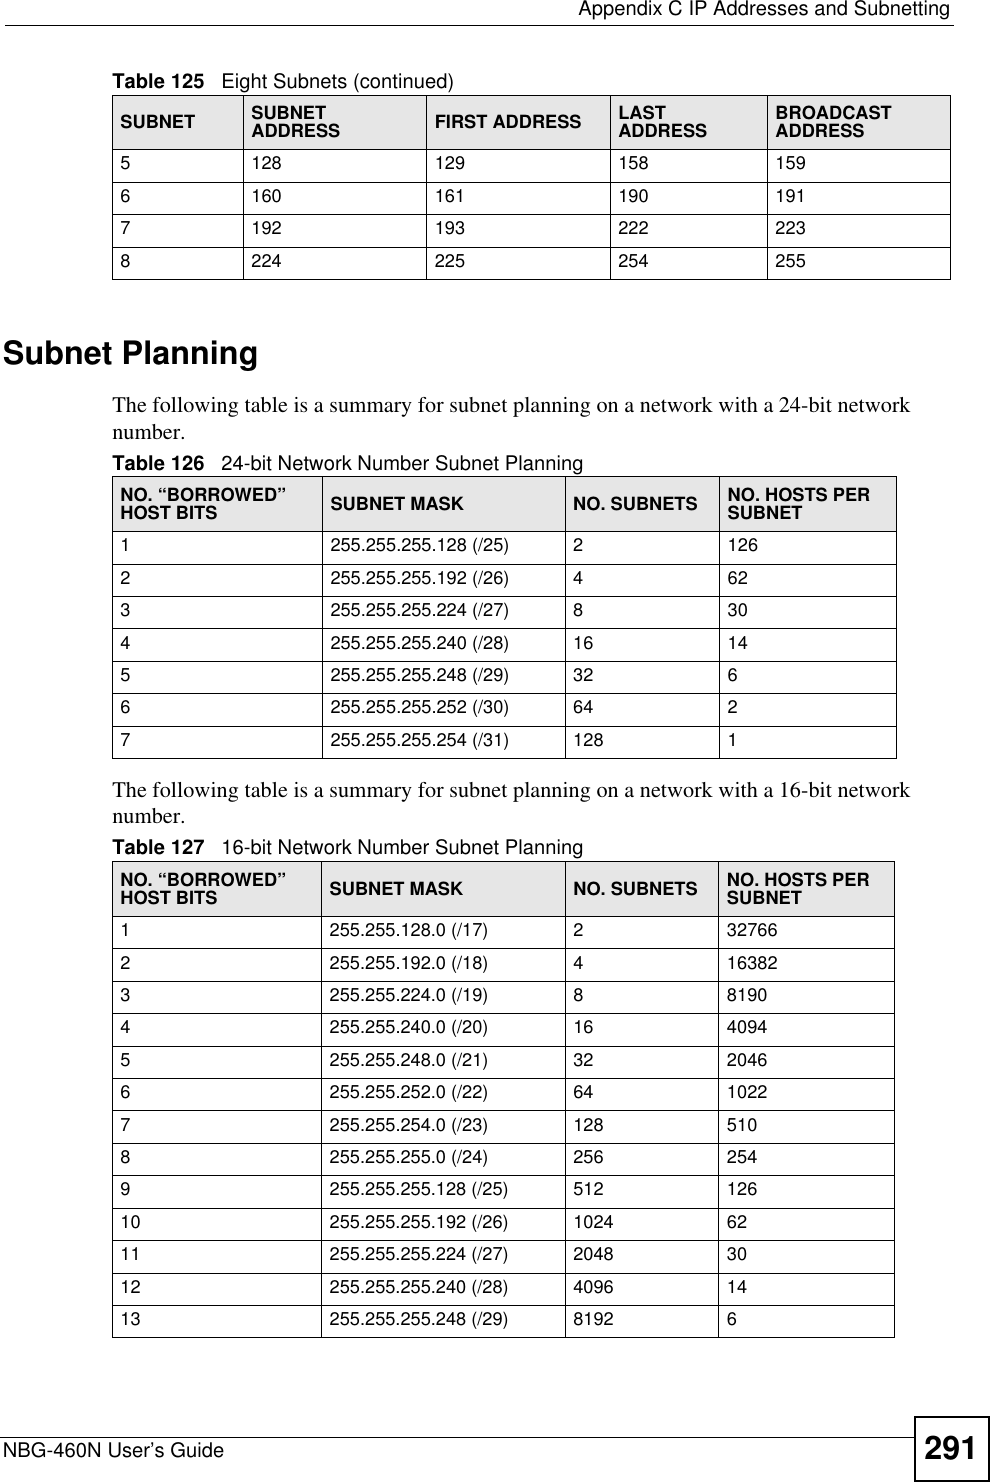  Appendix C IP Addresses and SubnettingNBG-460N User’s Guide 291Subnet PlanningThe following table is a summary for subnet planning on a network with a 24-bit network number.The following table is a summary for subnet planning on a network with a 16-bit network number. 5128 129 158 1596160 161 190 1917192 193 222 2238224 225 254 255Table 125   Eight Subnets (continued)SUBNET SUBNETADDRESS FIRST ADDRESS LAST ADDRESS BROADCAST ADDRESSTable 126   24-bit Network Number Subnet PlanningNO. “BORROWED” HOST BITS SUBNET MASK NO. SUBNETS NO. HOSTS PER SUBNET1255.255.255.128 (/25) 21262255.255.255.192 (/26) 4623255.255.255.224 (/27) 8304255.255.255.240 (/28) 16 145255.255.255.248 (/29) 32 66255.255.255.252 (/30) 64 27255.255.255.254 (/31) 128 1Table 127   16-bit Network Number Subnet PlanningNO. “BORROWED” HOST BITS SUBNET MASK NO. SUBNETS NO. HOSTS PER SUBNET1255.255.128.0 (/17) 2327662255.255.192.0 (/18) 4163823255.255.224.0 (/19) 881904255.255.240.0 (/20) 16 40945255.255.248.0 (/21) 32 20466255.255.252.0 (/22) 64 10227255.255.254.0 (/23) 128 5108255.255.255.0 (/24) 256 2549255.255.255.128 (/25) 512 12610 255.255.255.192 (/26) 1024 6211 255.255.255.224 (/27) 2048 3012 255.255.255.240 (/28) 4096 1413 255.255.255.248 (/29) 8192 6